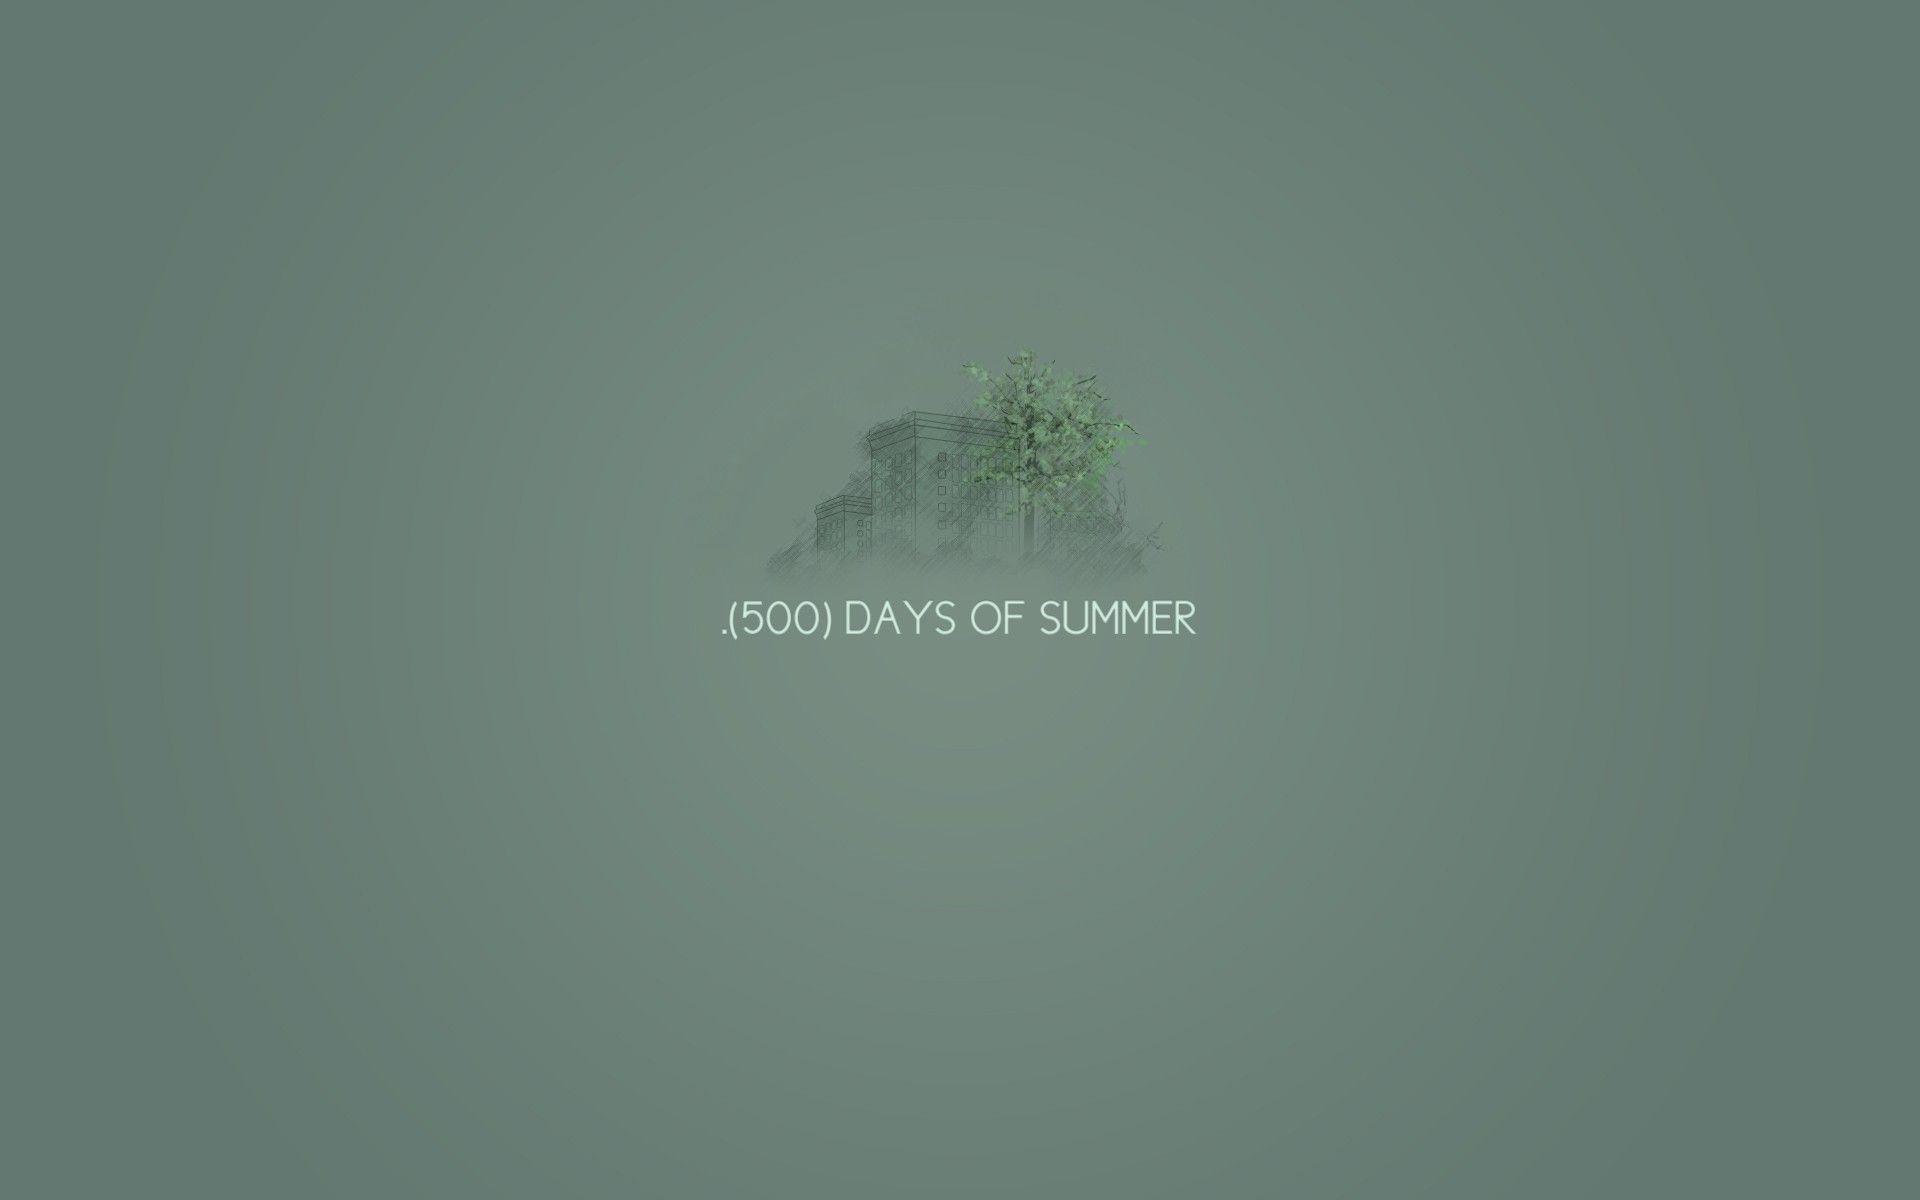 Download the Days of Summer Wallpaper, Days of Summer iPhone